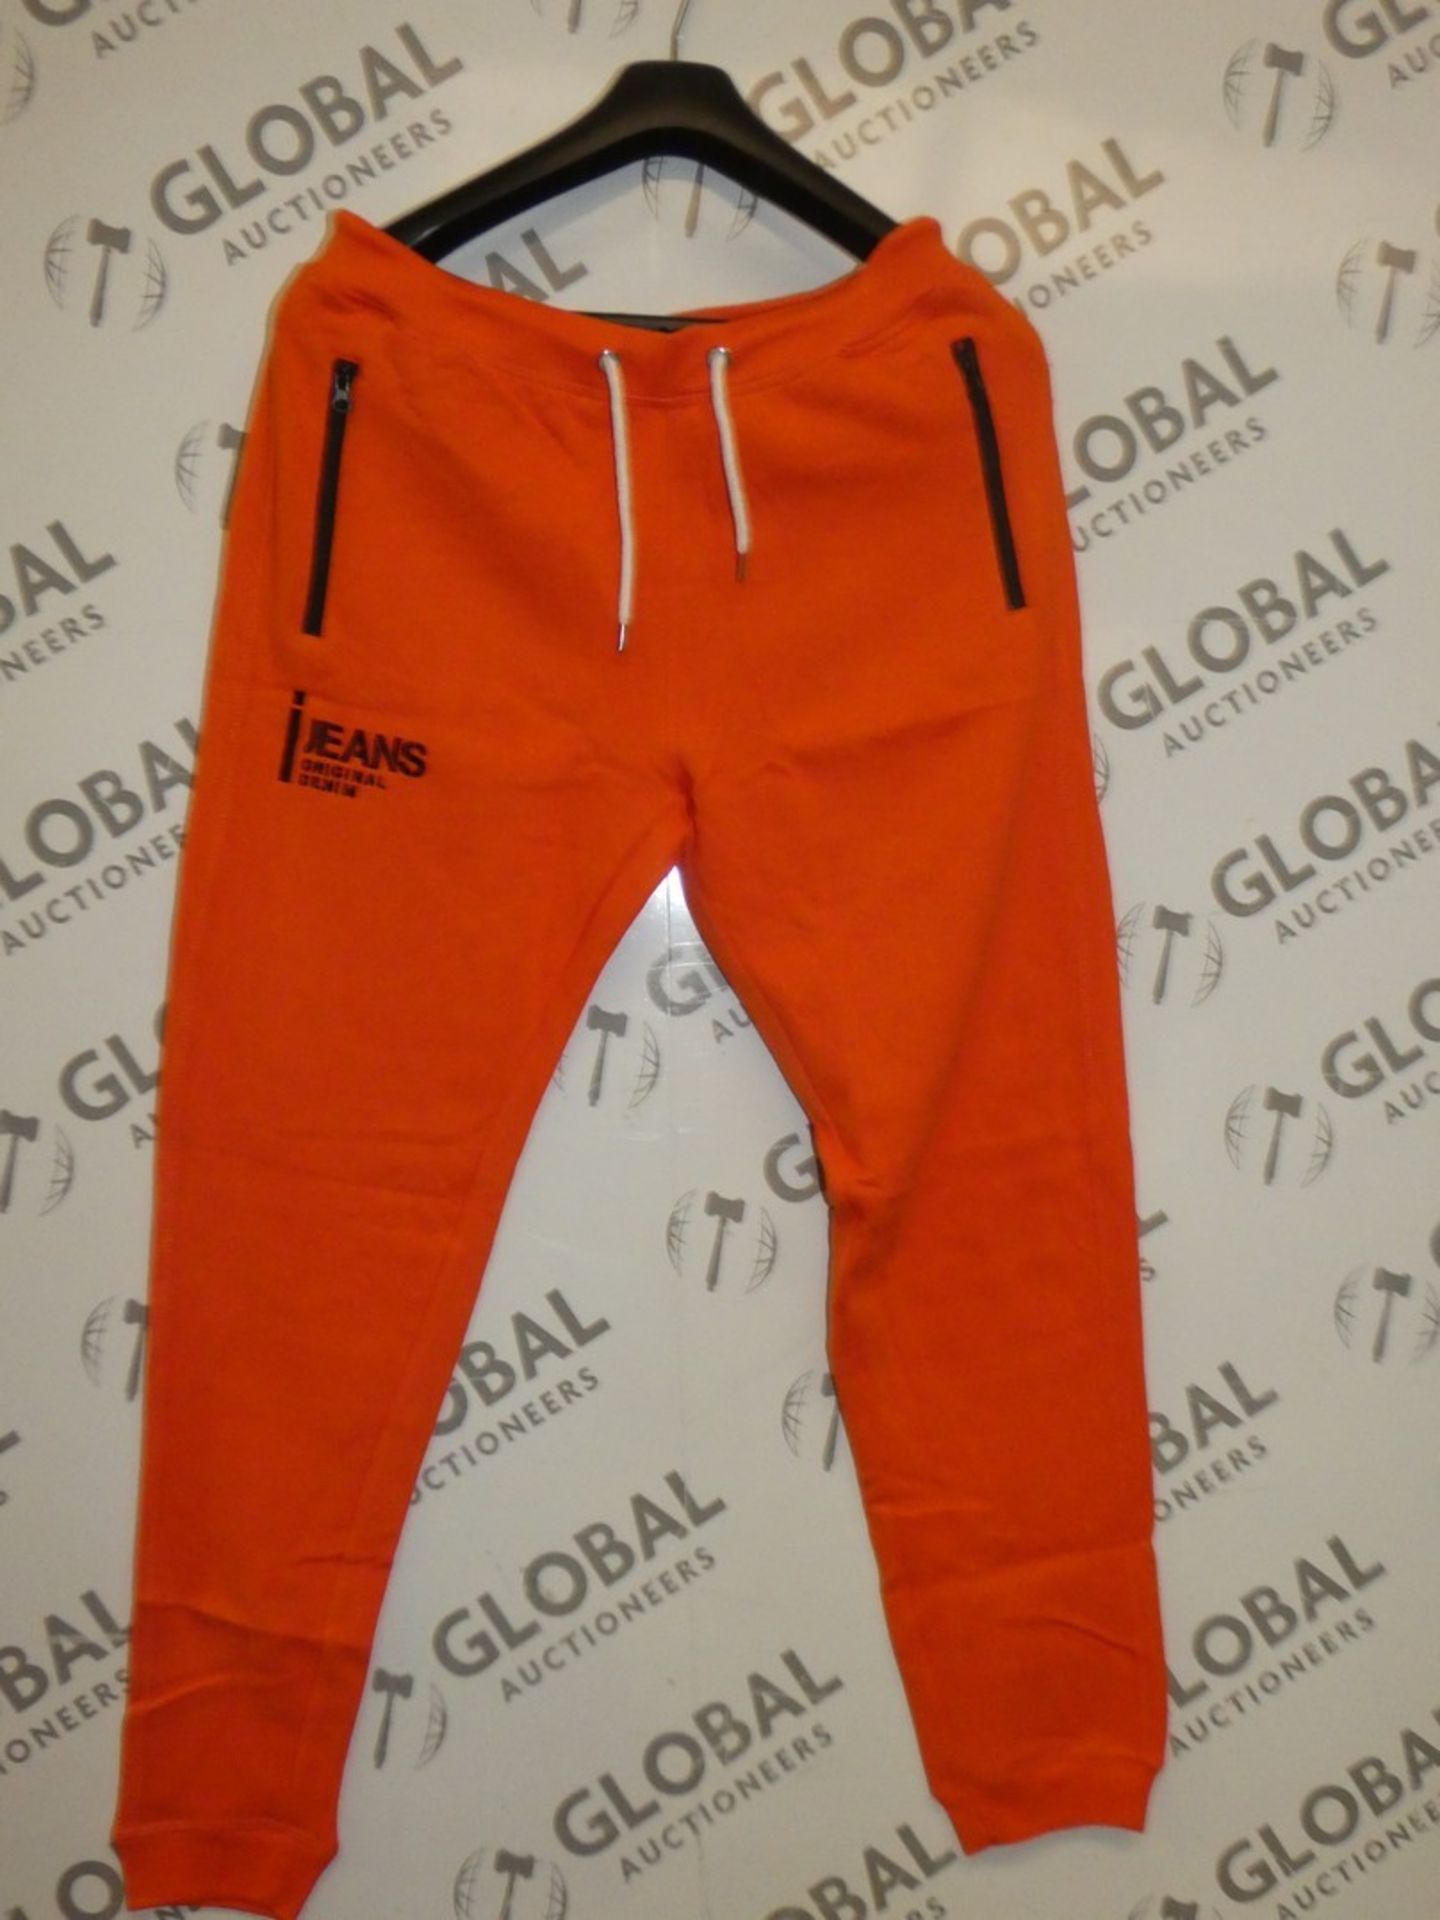 Brand New Pairs Of Size Large Bright Orange IJeans Original Lounging Pants RRP £29.99 (482)